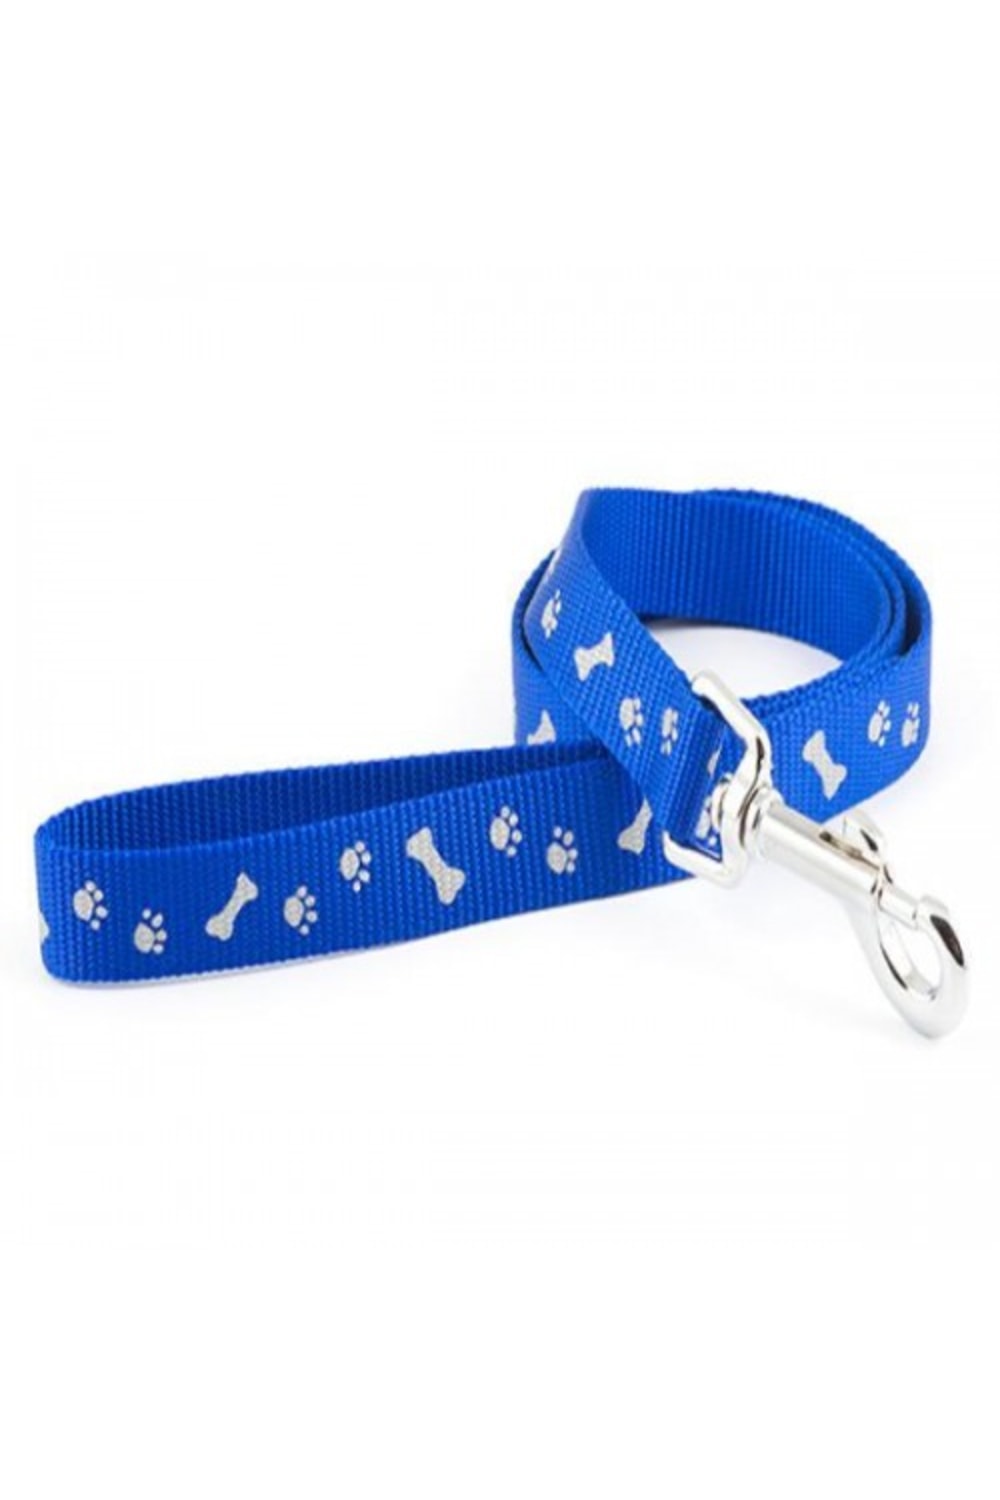 Ancol Pet Products Paw N Bone Dog Leash (Blue) (0.75in x 3.3ft)